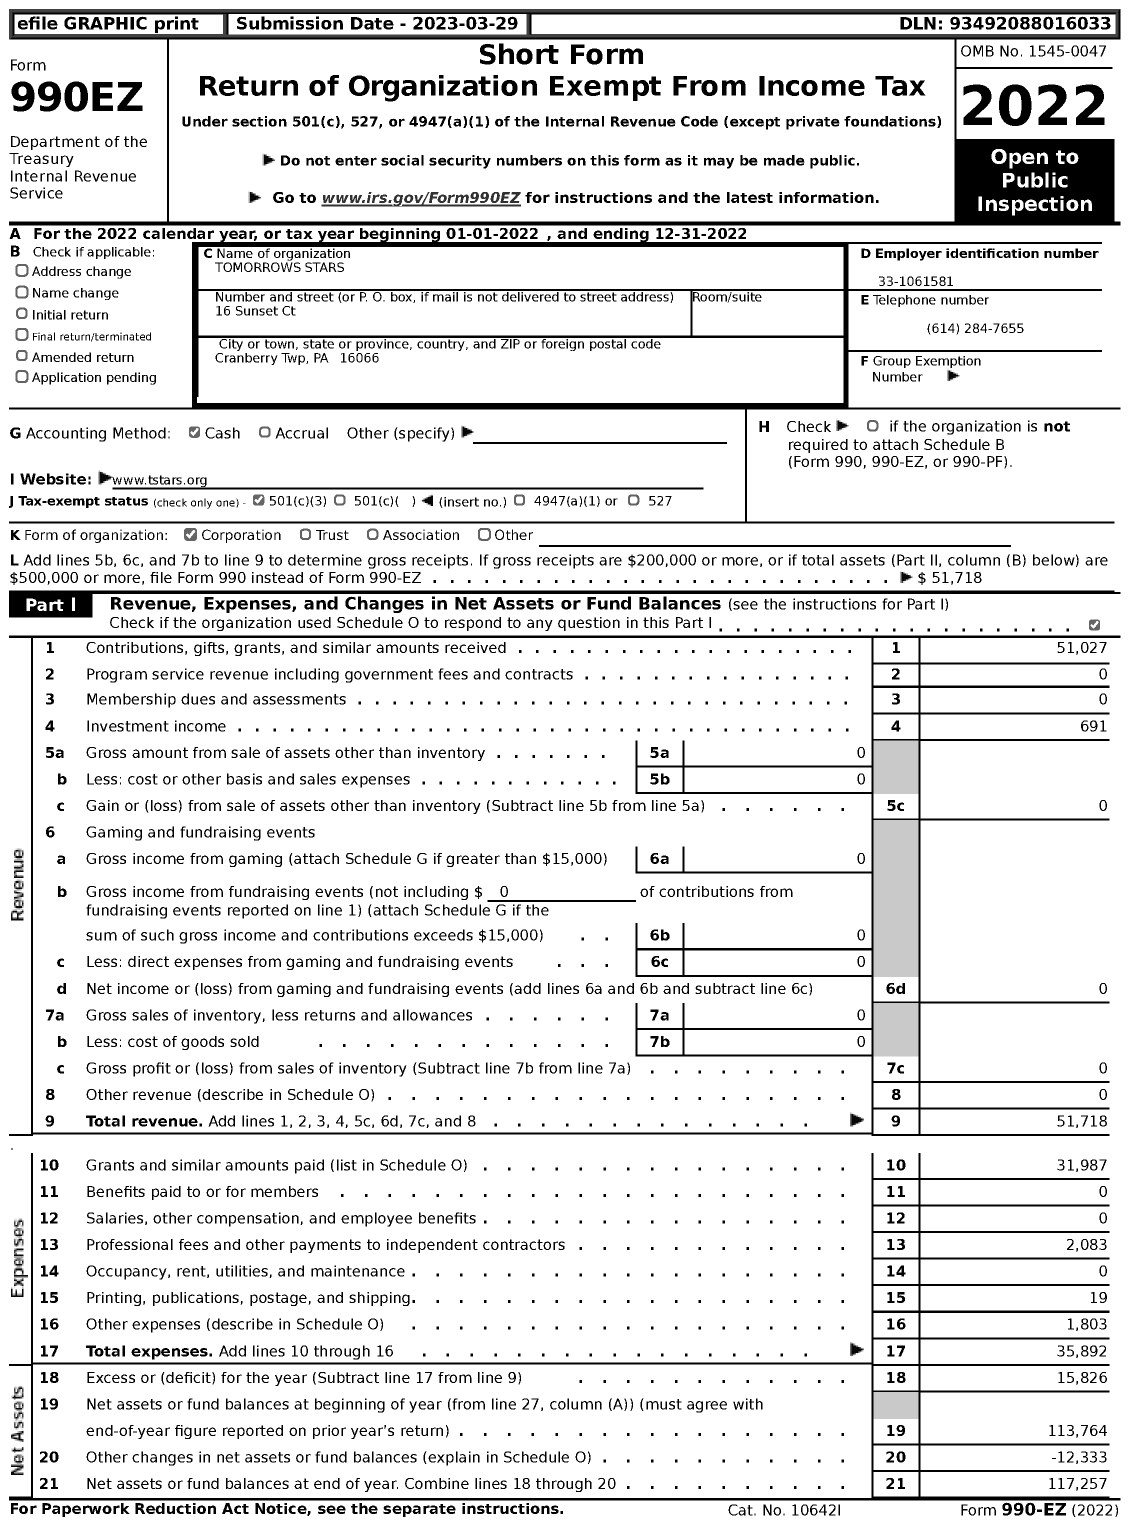 Image of first page of 2022 Form 990EZ for Tomorrows Stars